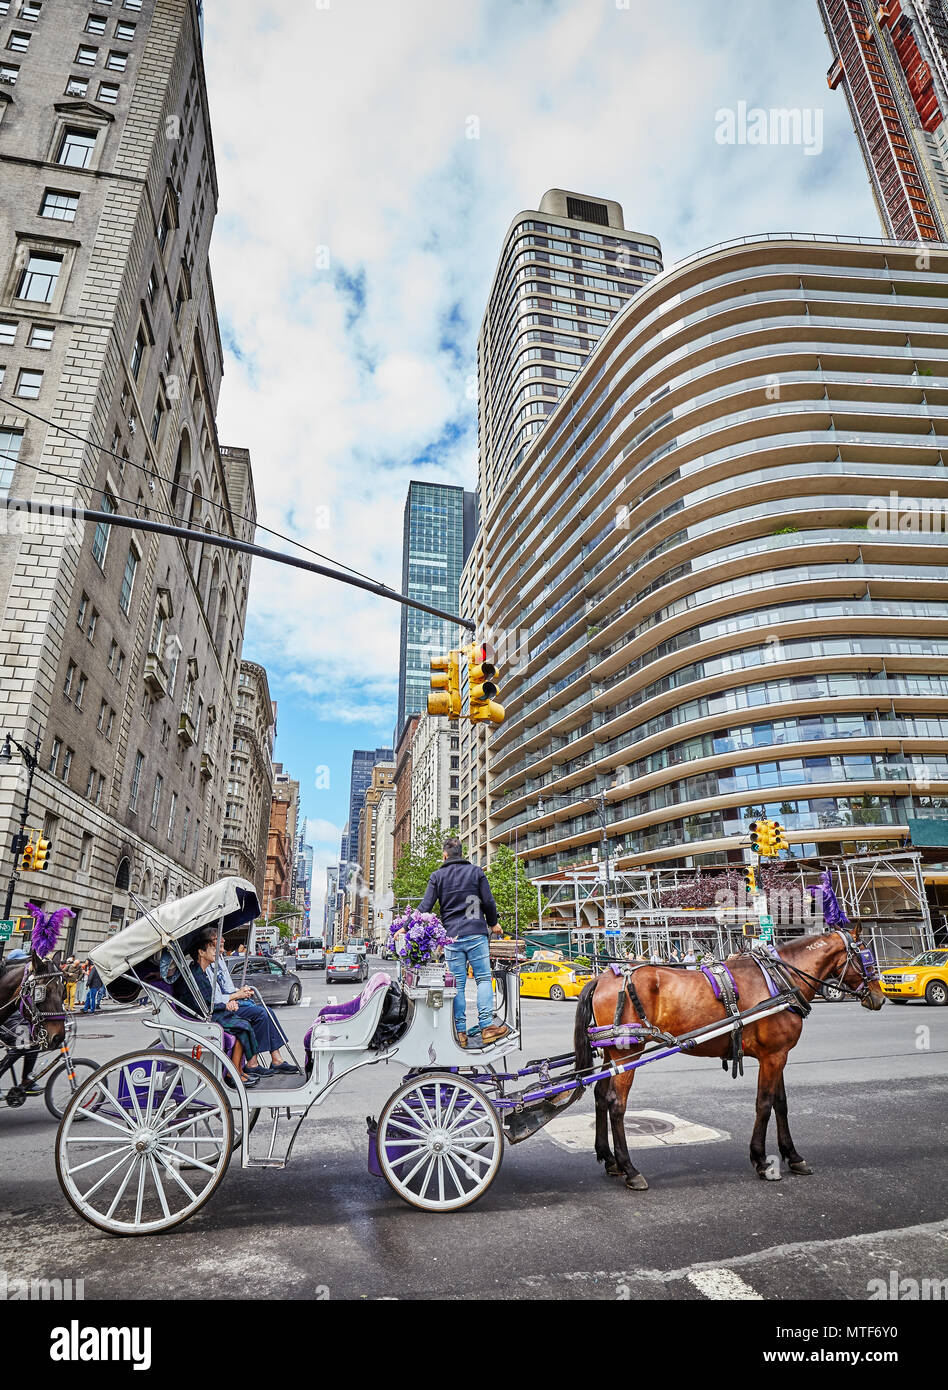 New York City, USA - May 26, 2017: Horse carriage ride by the Central Park. It is one of the best ways for tourists to enjoy the beauty of the park. Stock Photo